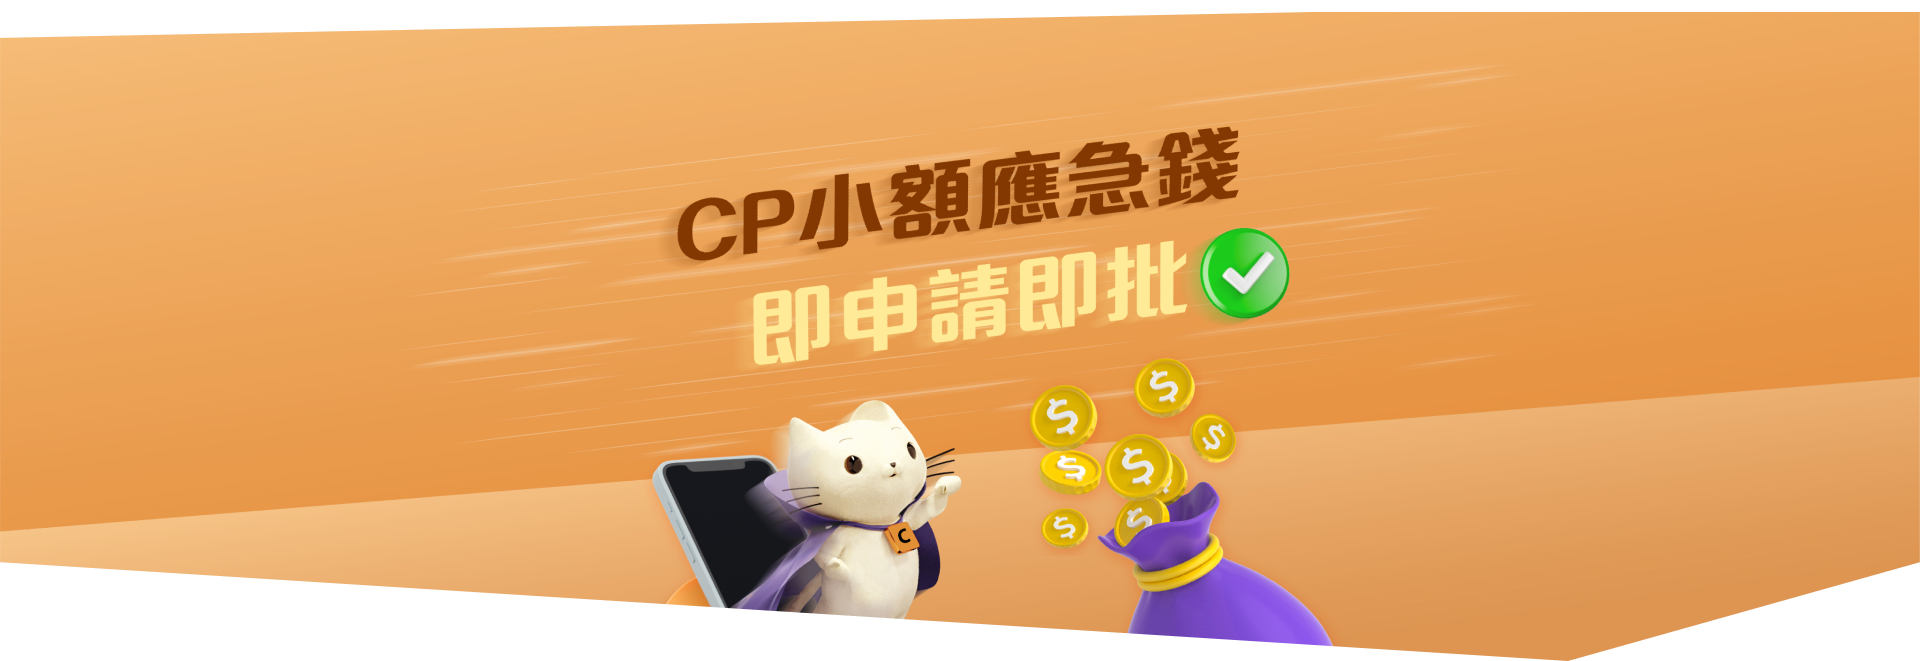 Cashing Pro即批小額應急錢 Why Not